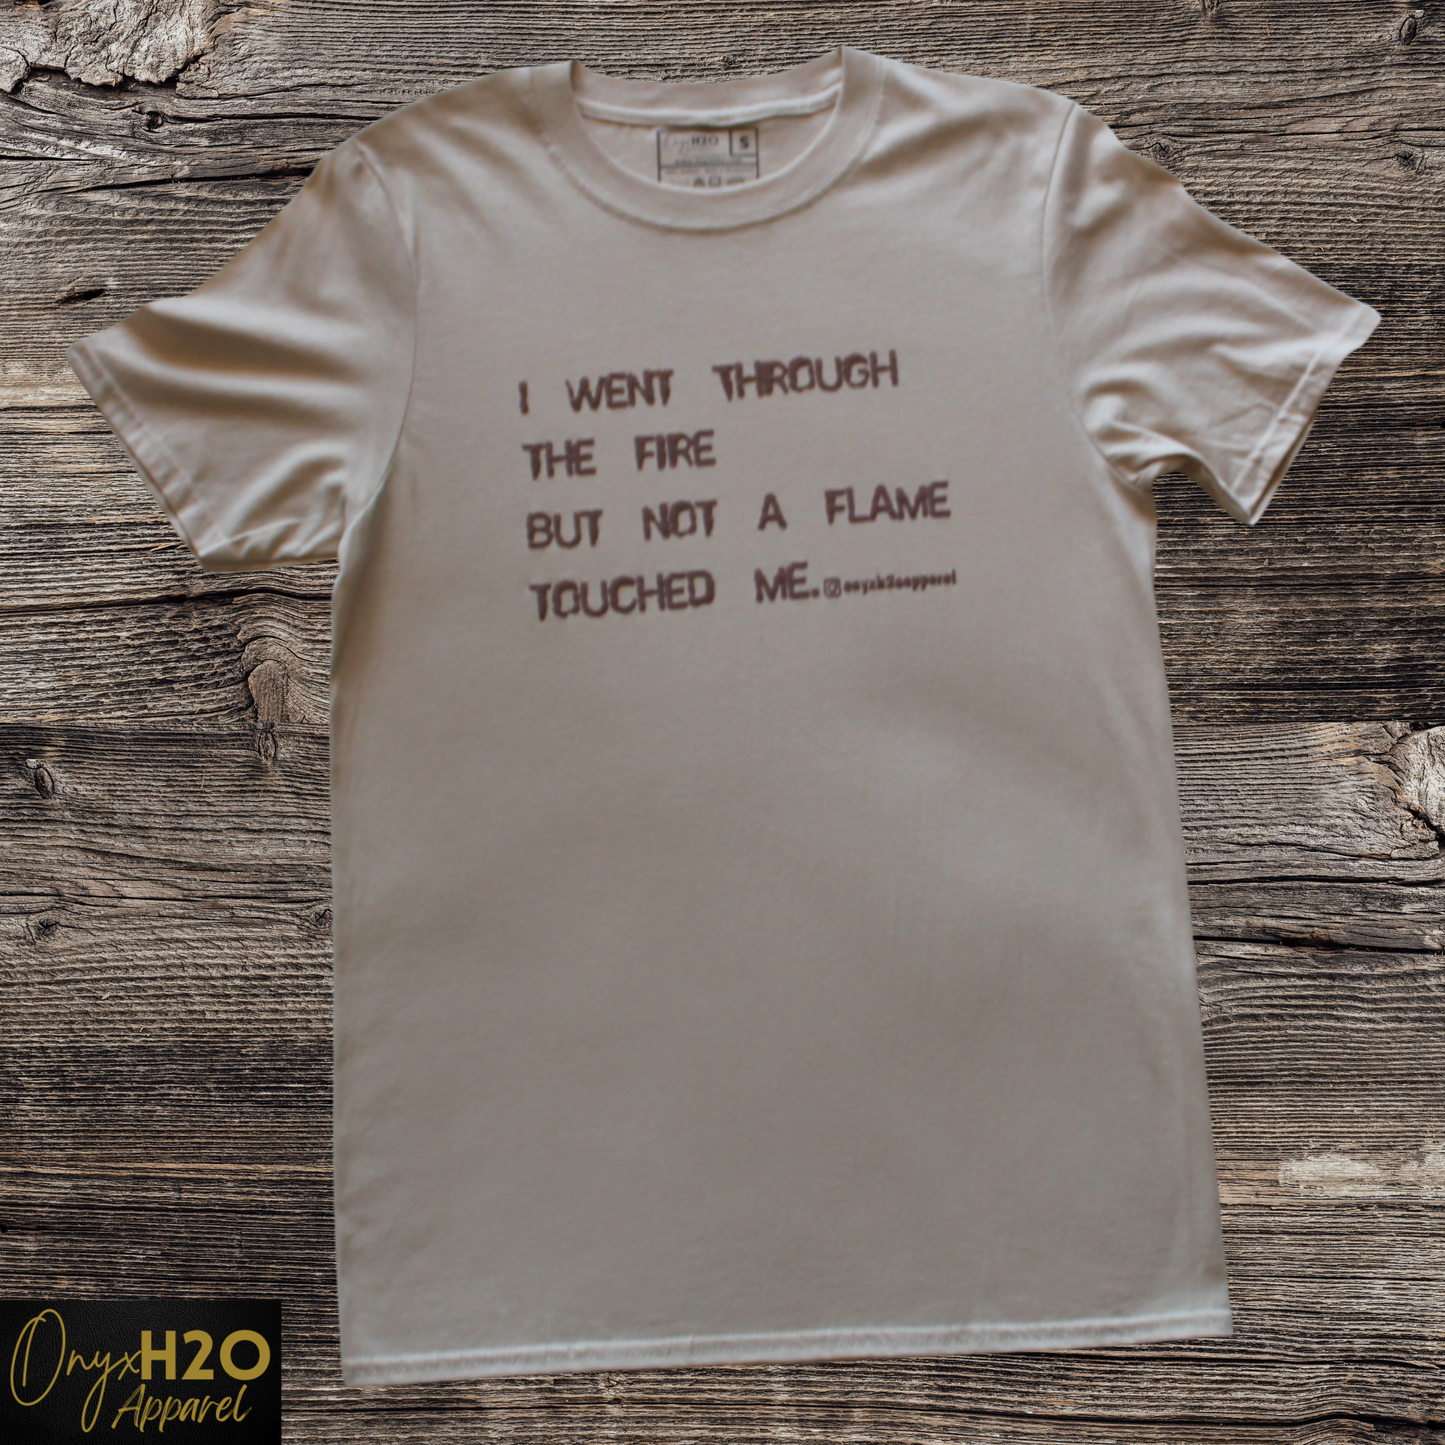 Not A Flame Touched Me T-shirt